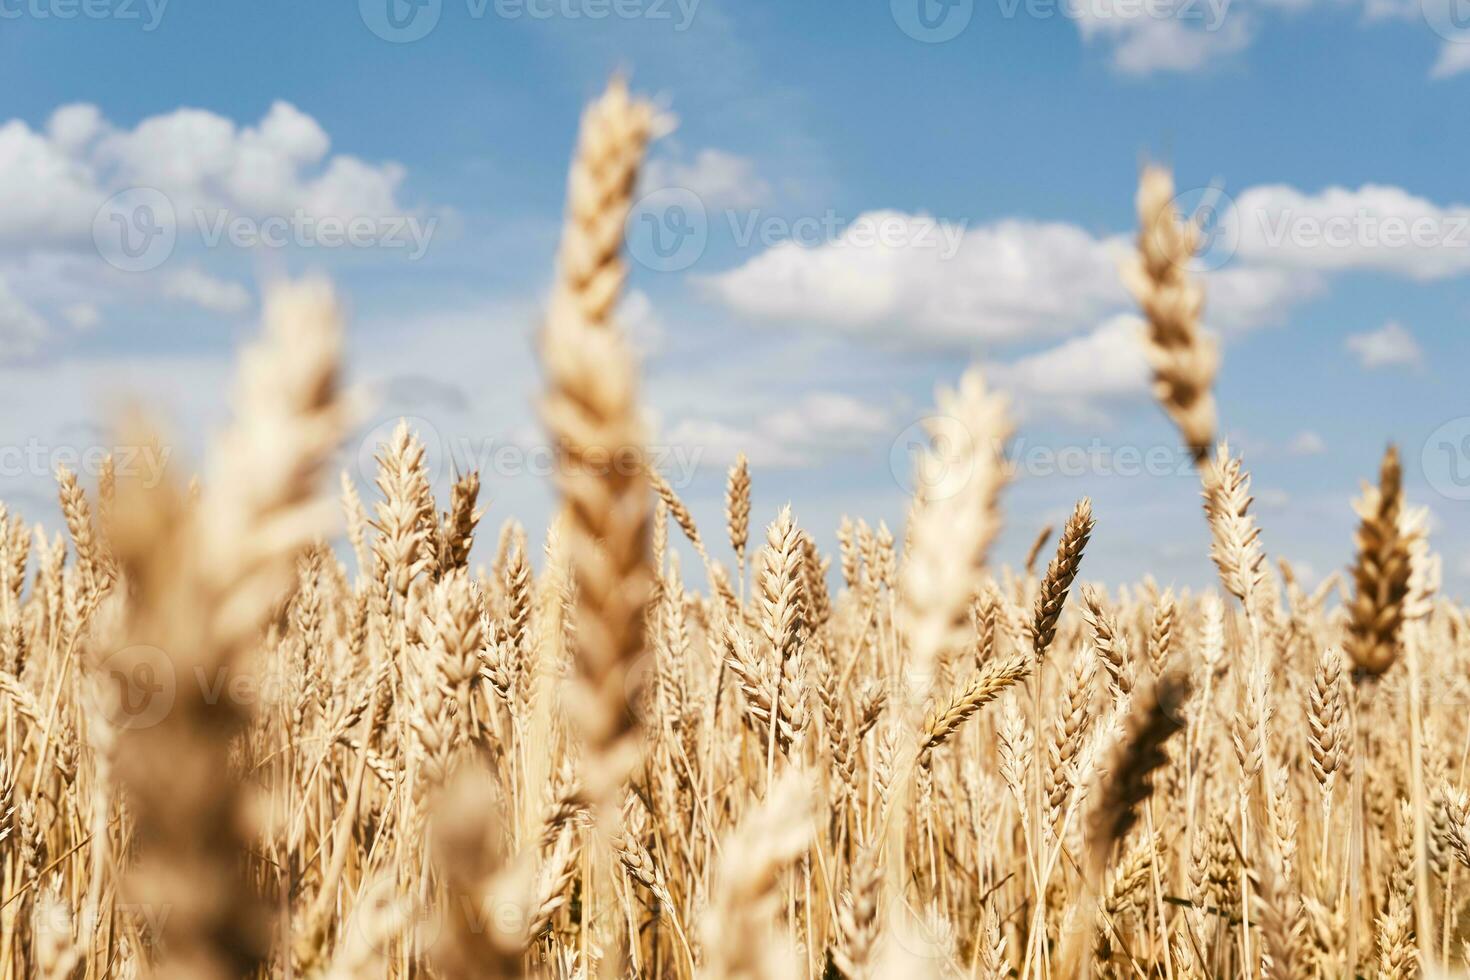 Golden ripe ears of wheat close-up. Endless wheat field. Harvesting, agricultural farm and healthy food production photo